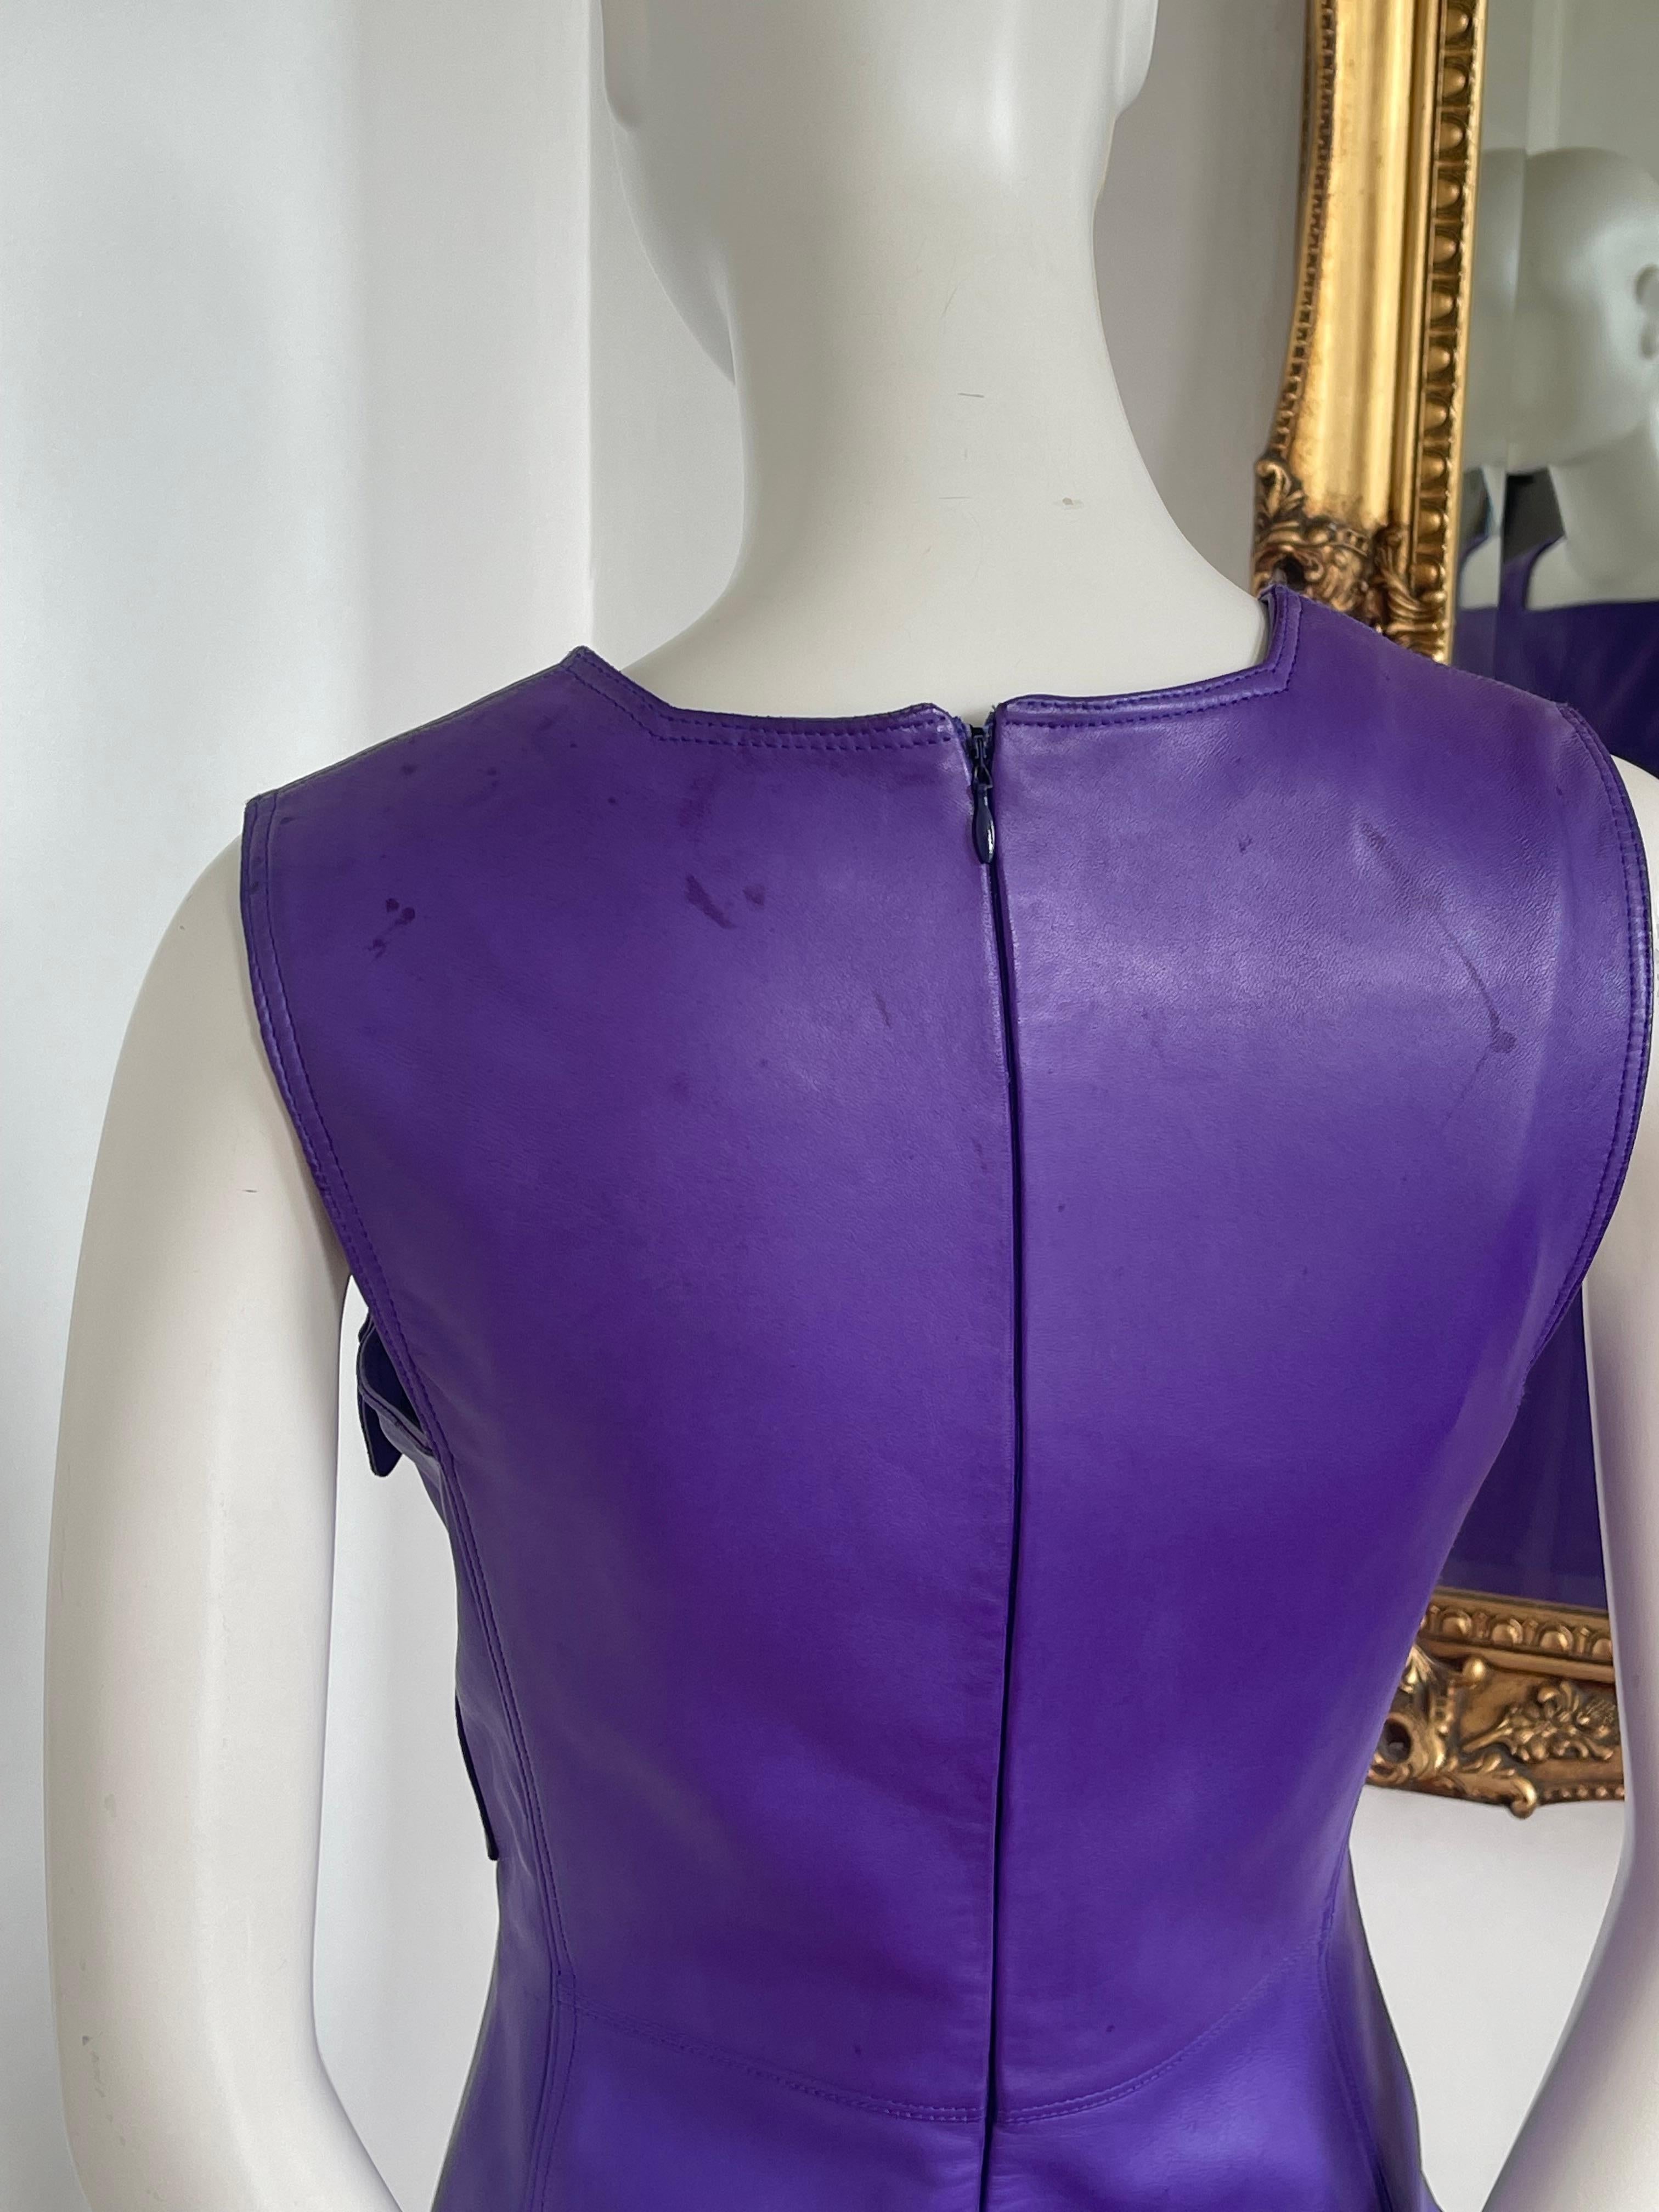 FW 1996 Versace purple leather shift dress with medusa buttons 3